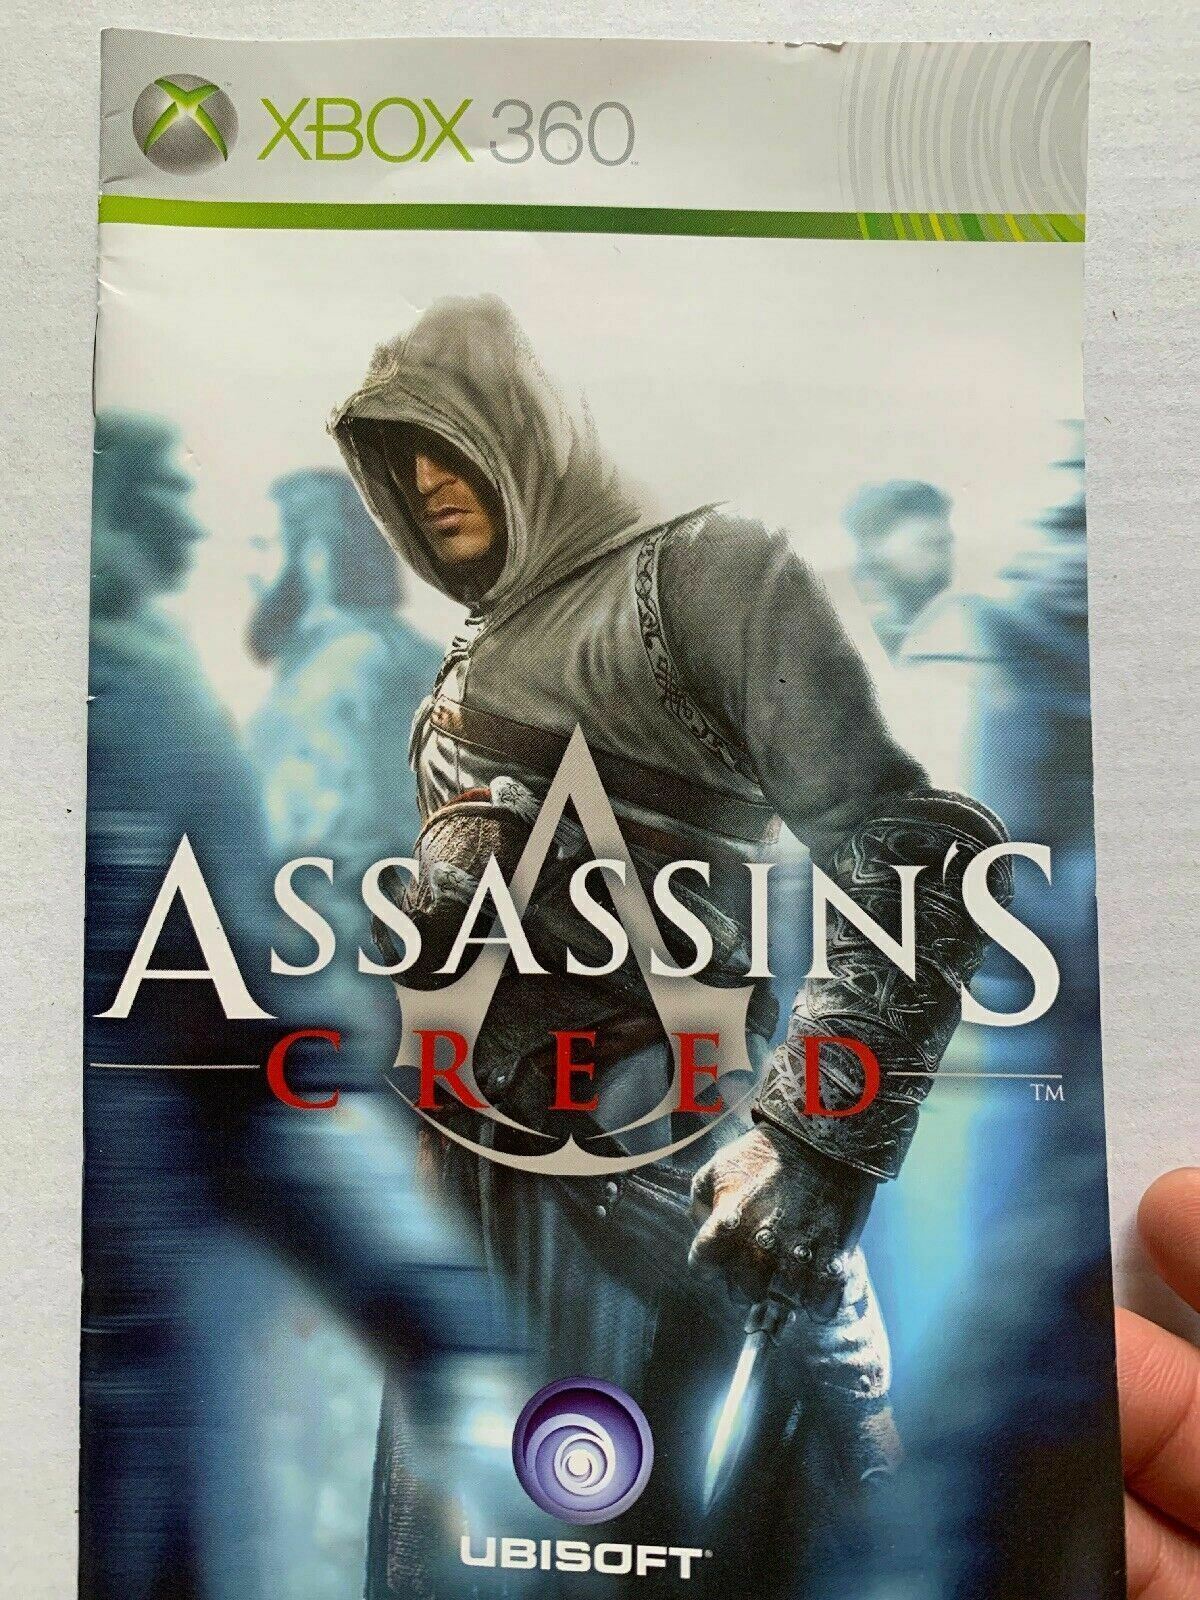 Assassin's Creed: 1 & Revelations + CD Soundtrack - Microsoft Xbox 360 PAL Game